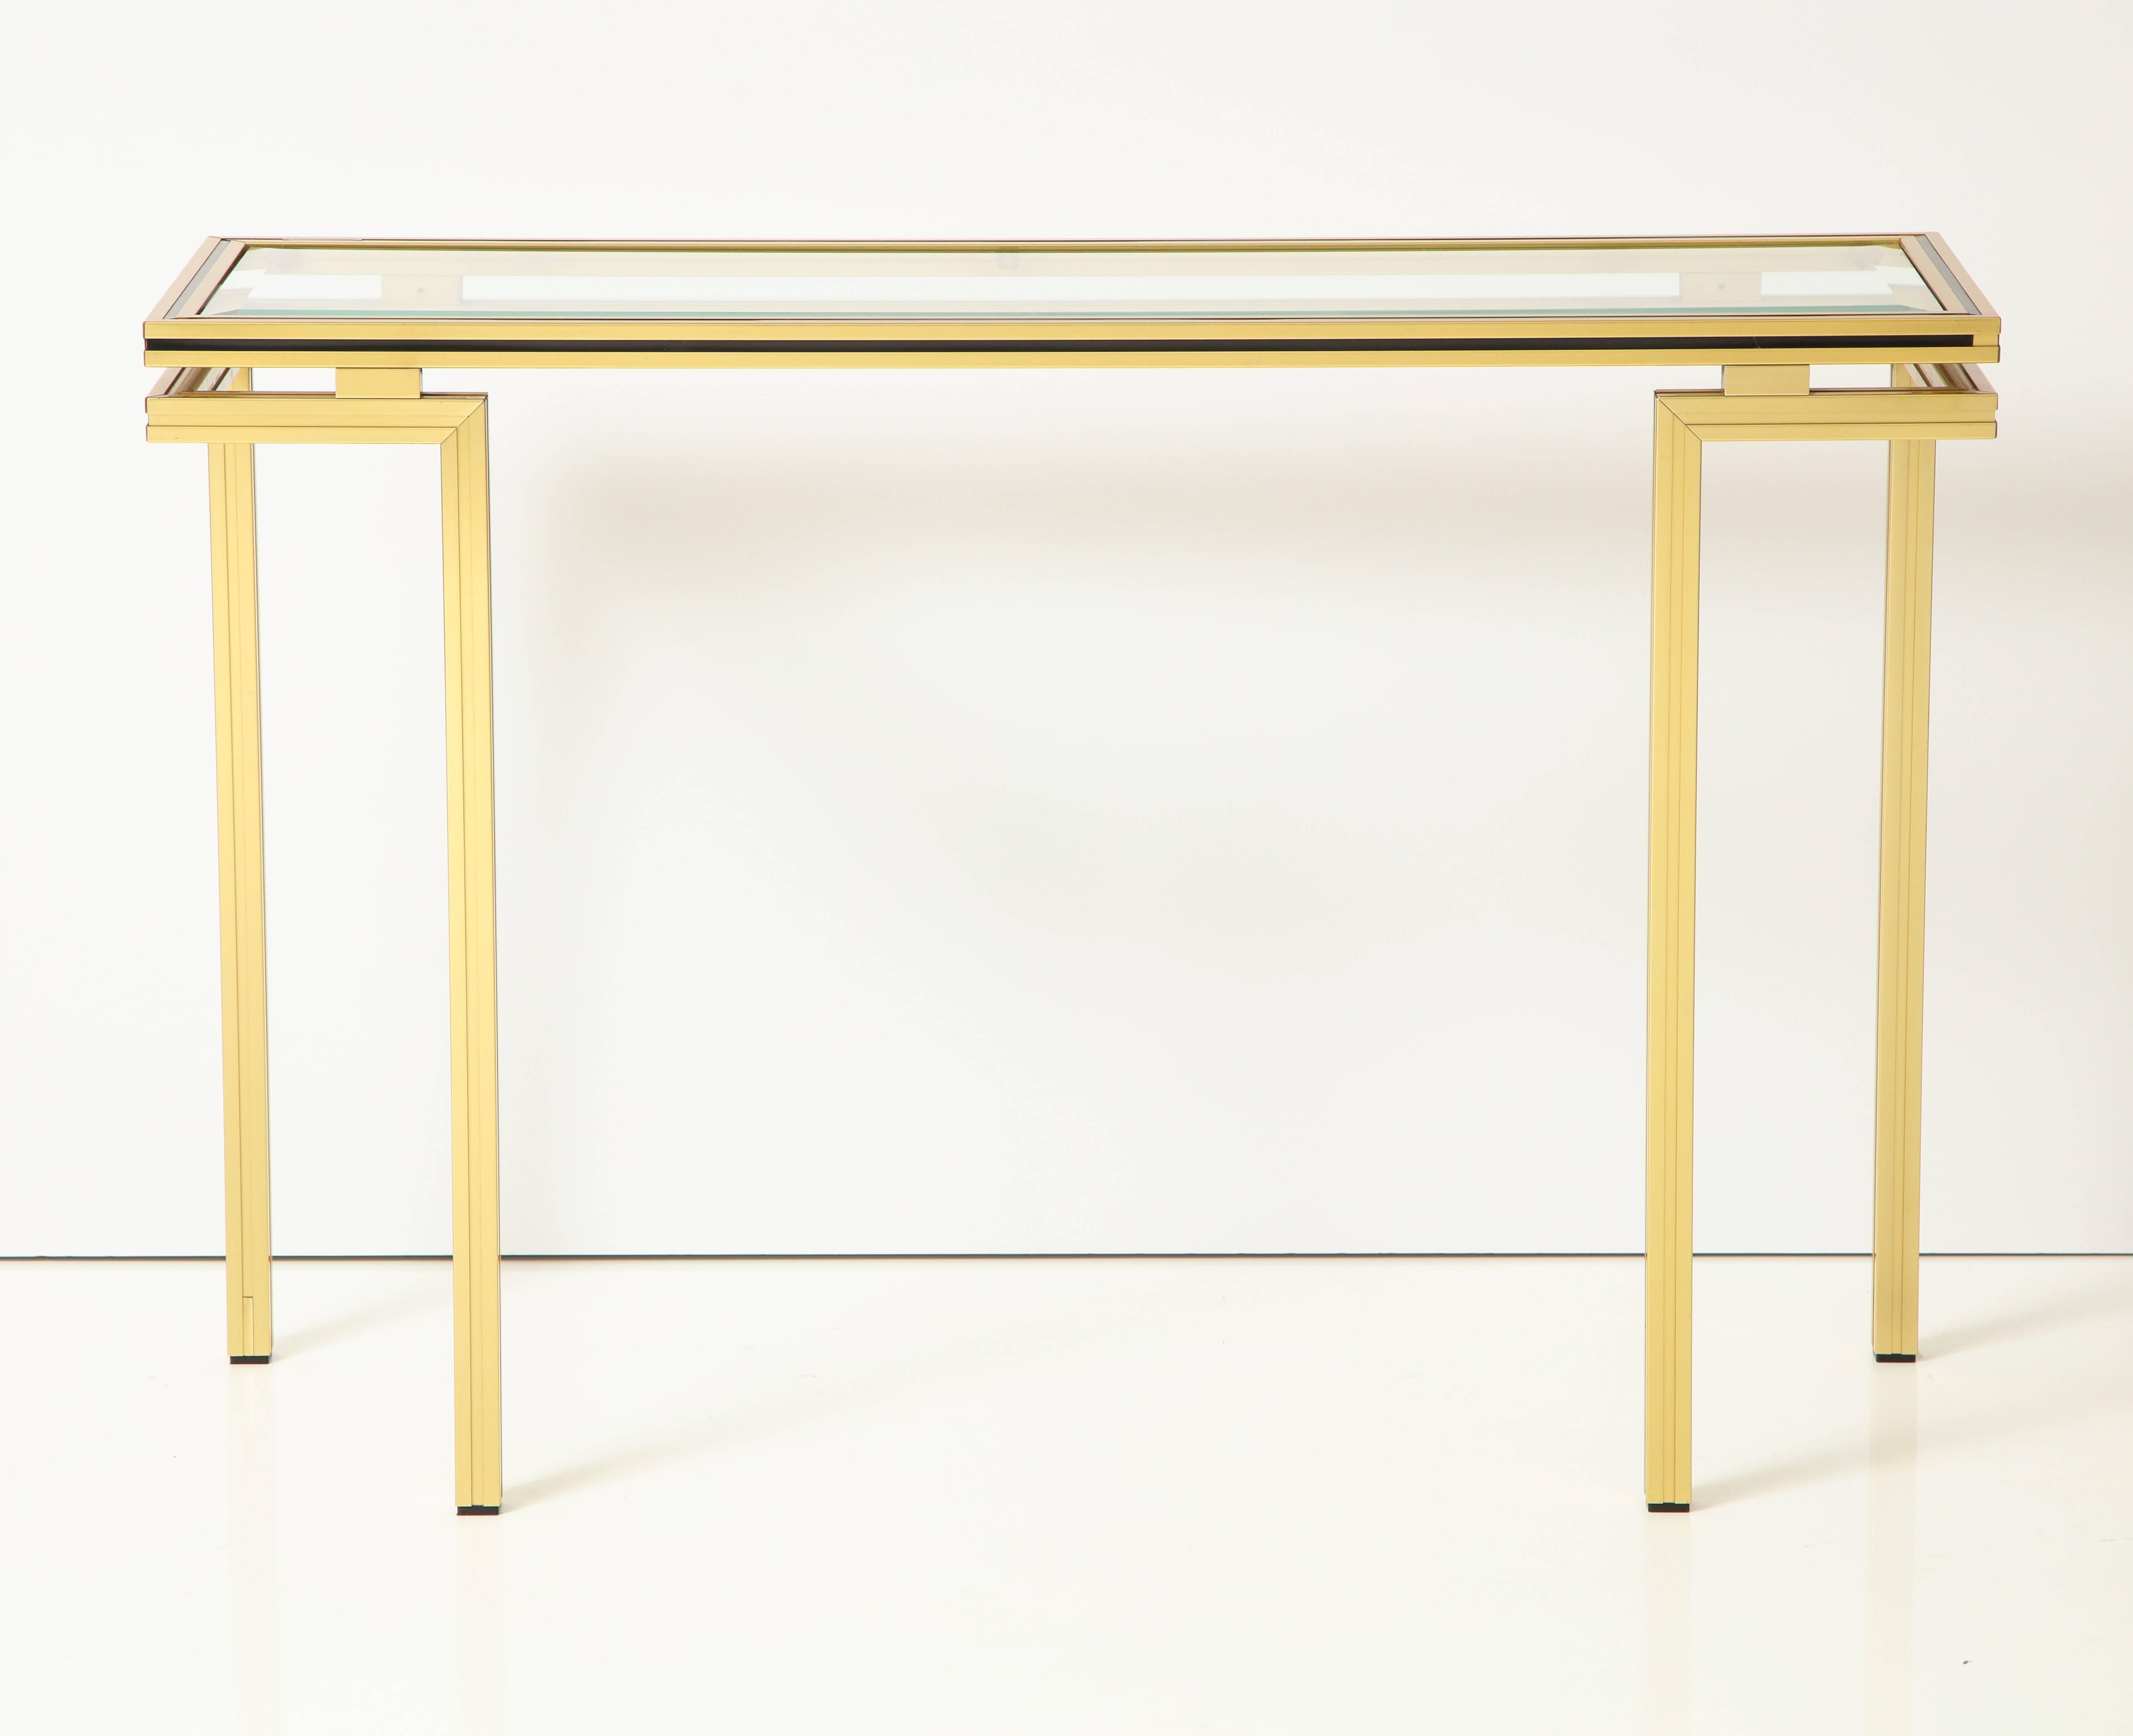 A very elegant and timeless pair of Pierre Vandel brass console tables with inset beveled glass and ebonized trim.
Signed Pierre Vandel on top of both tables. 
Paris, France circa 1970
